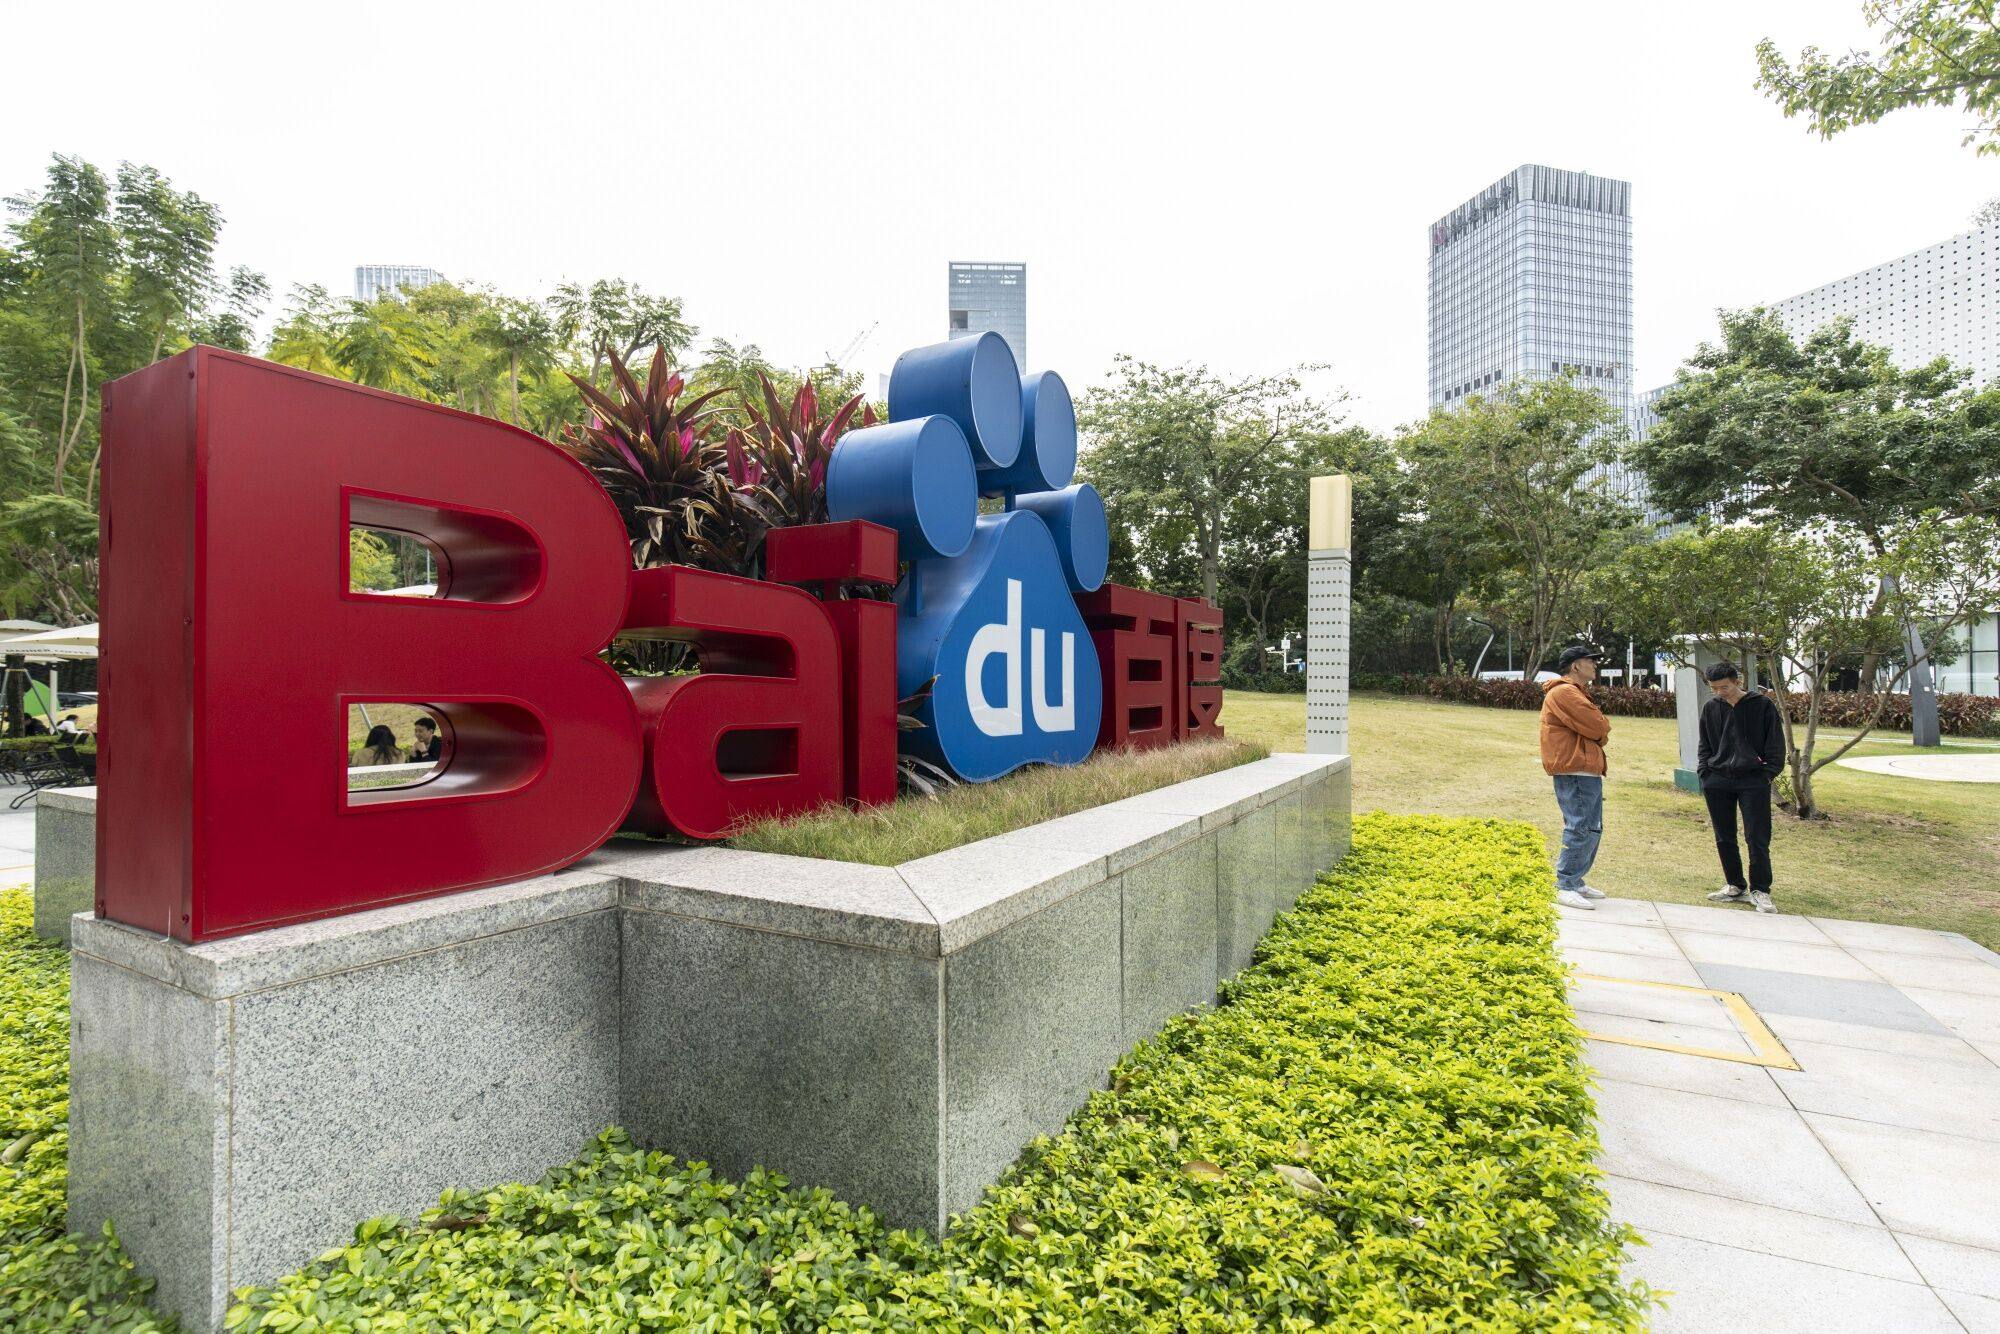 Controversial comments made by Baidu’s public relations head has sparked a public backlash in China. Photo: Bloomberg